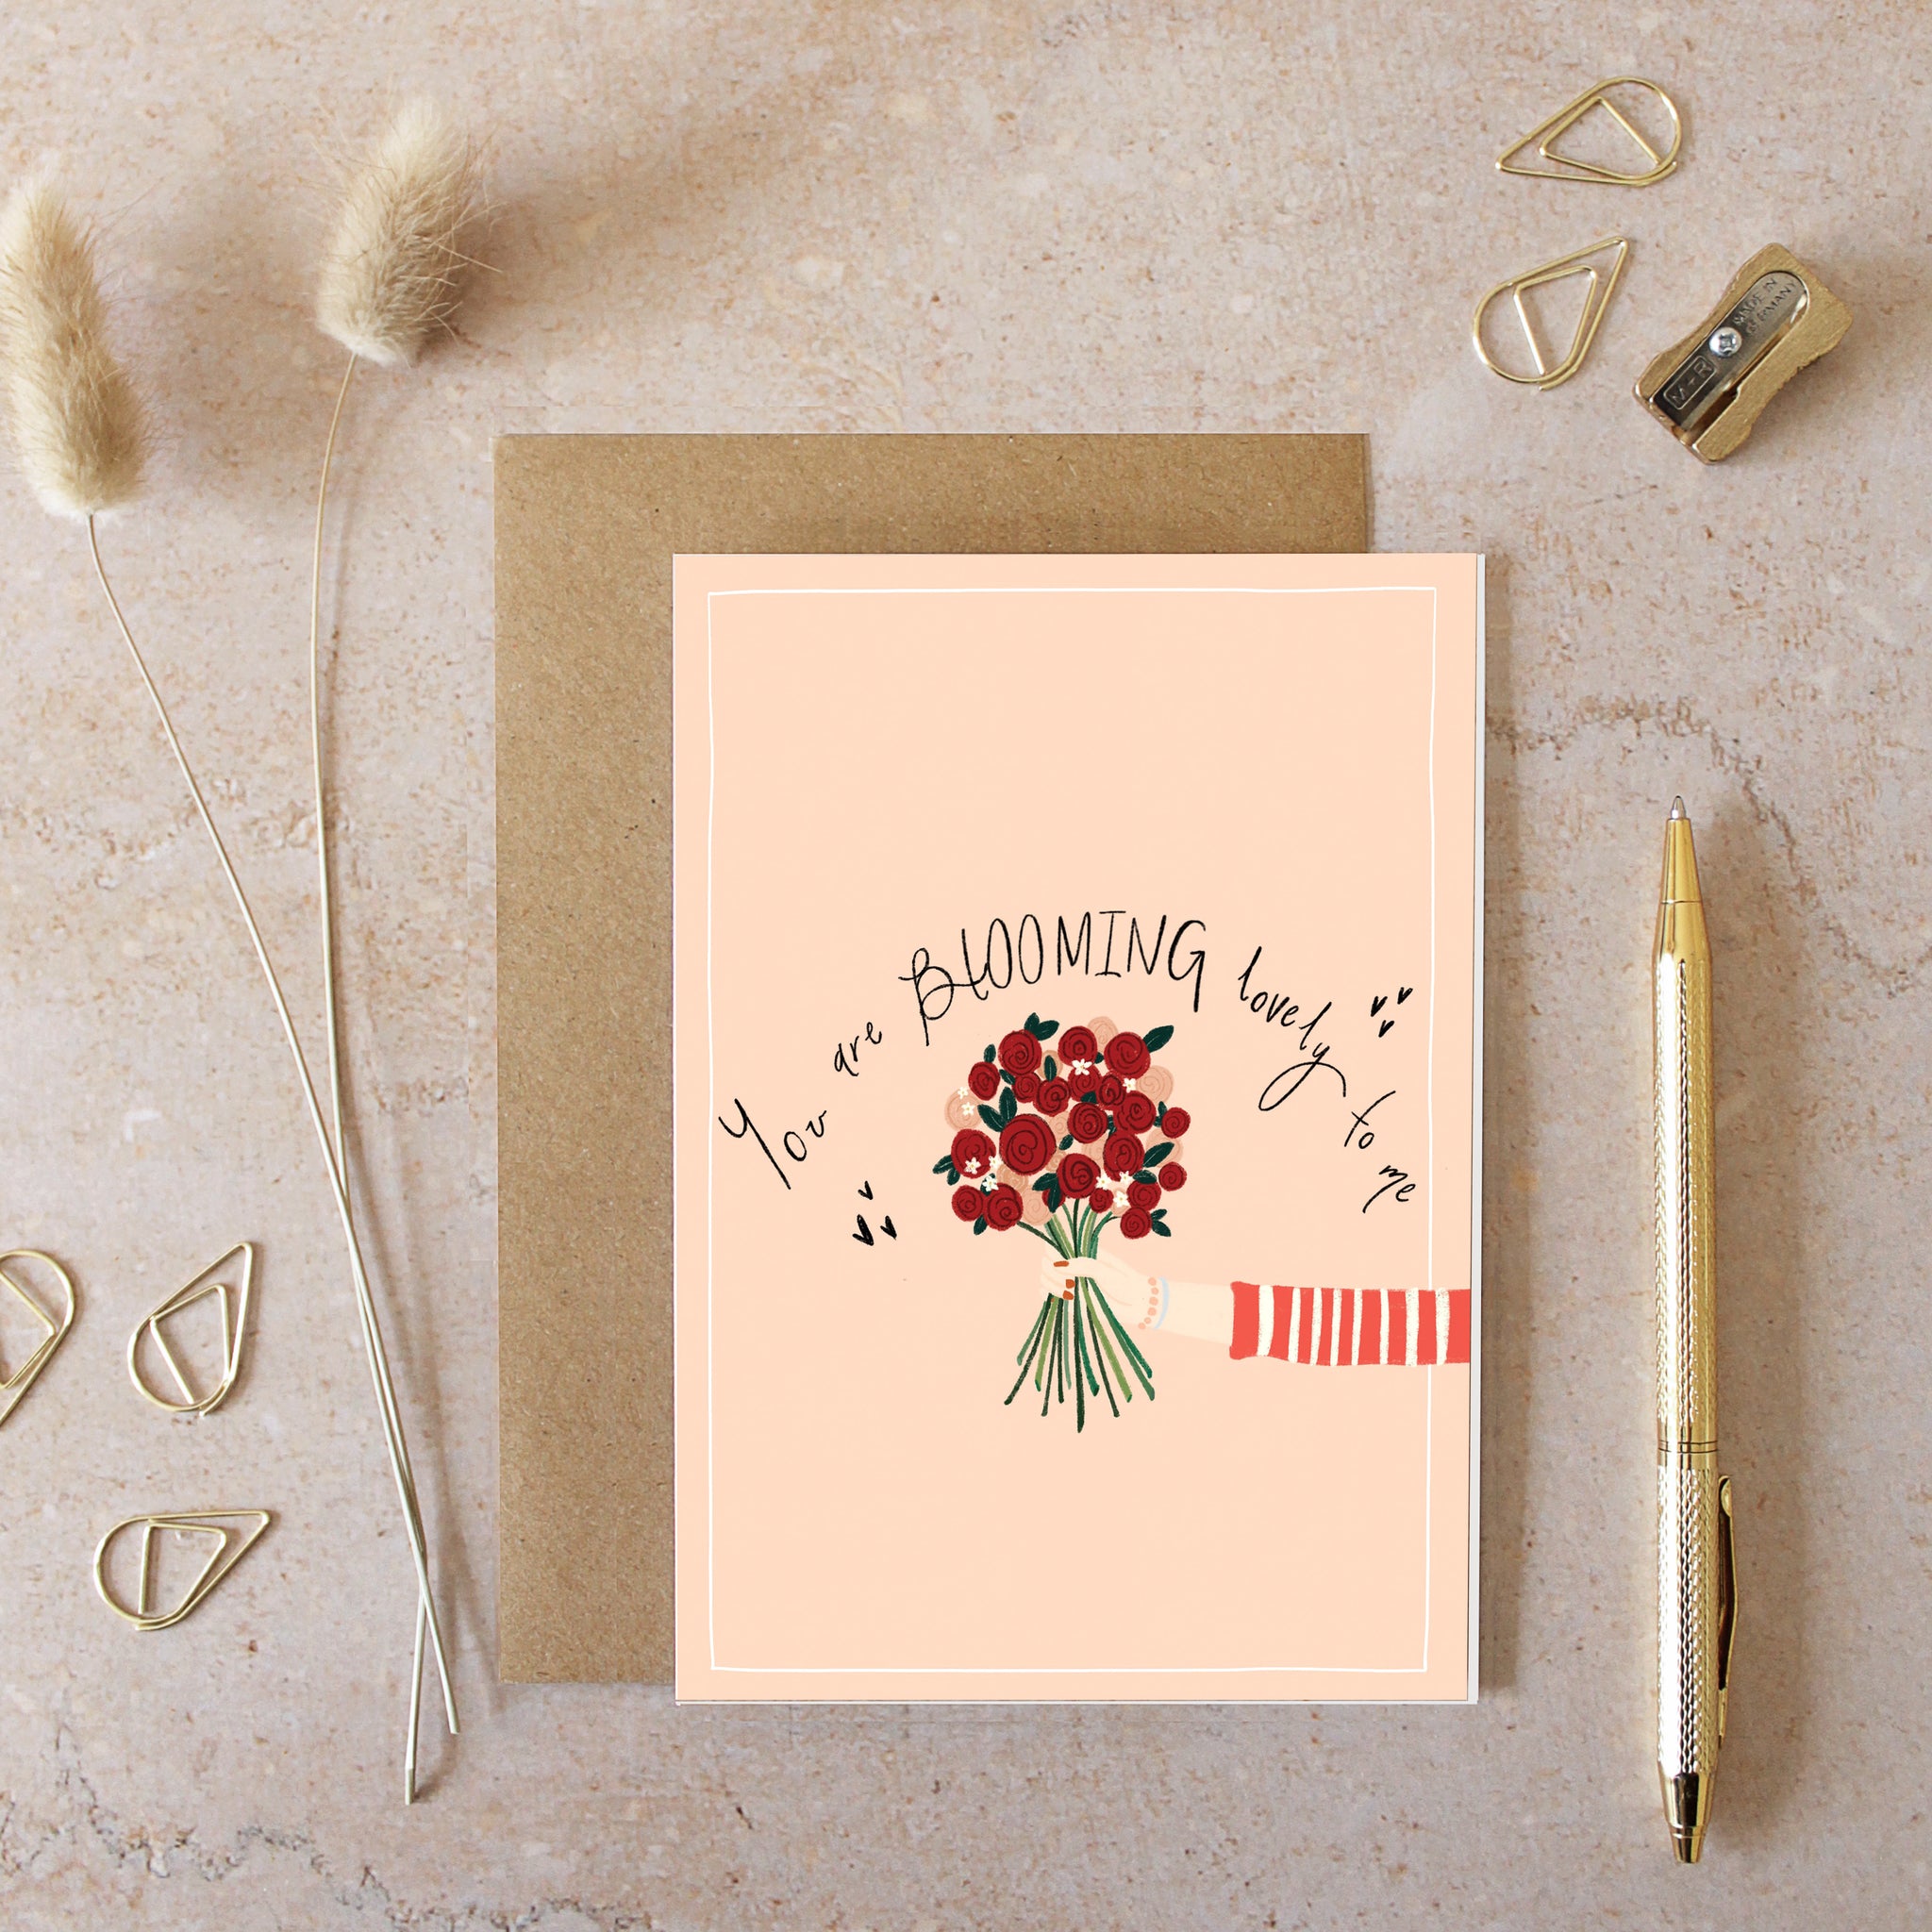 Blooming Lovely Valentines Day Card/Friendship Card/Valentines Day Card/Galentines Card/Cute Card/Occassion Card/Blank Card/Gifts for Her